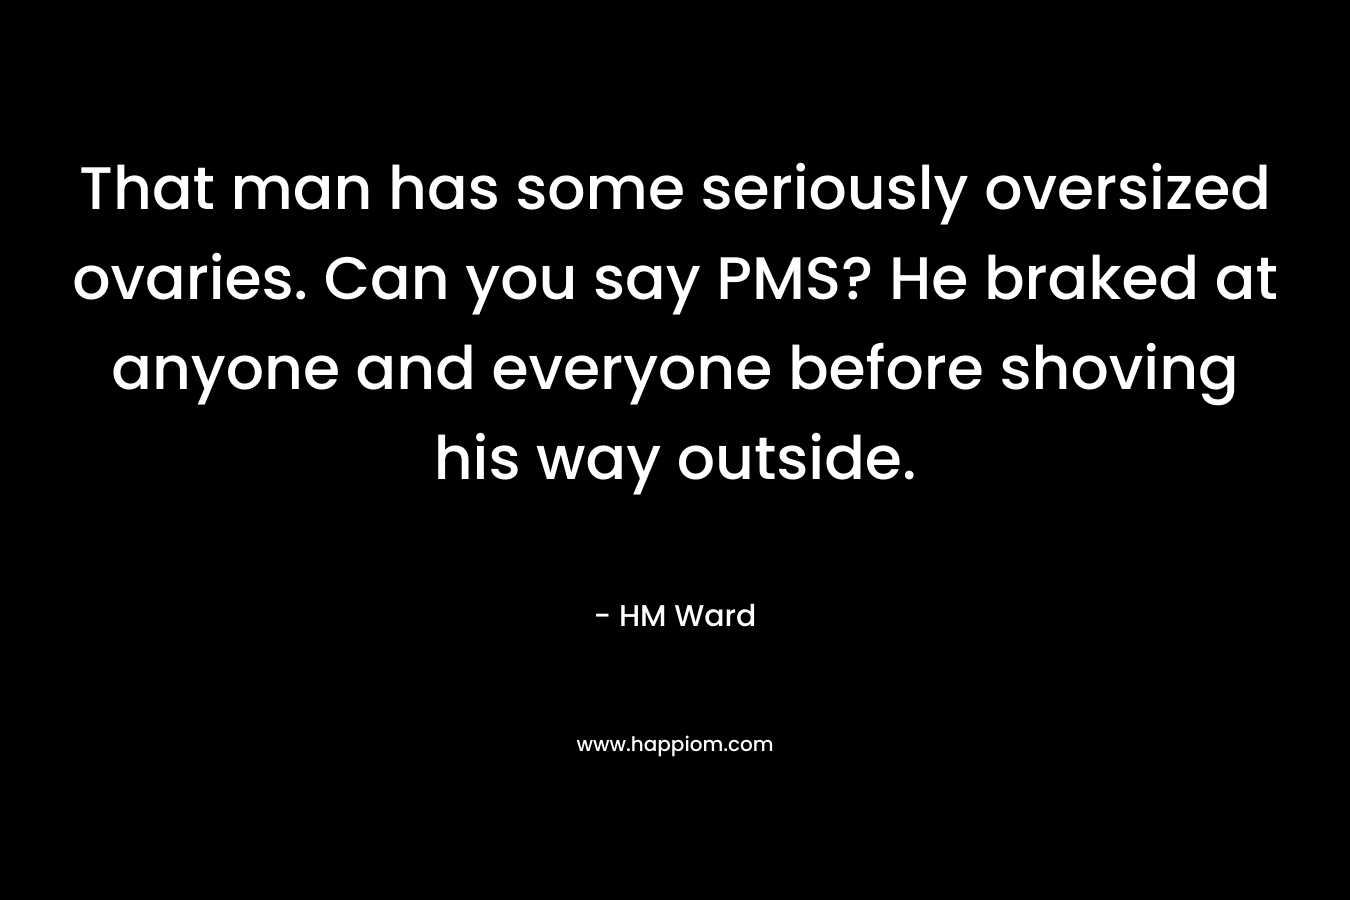 That man has some seriously oversized ovaries. Can you say PMS? He braked at anyone and everyone before shoving his way outside. – HM Ward